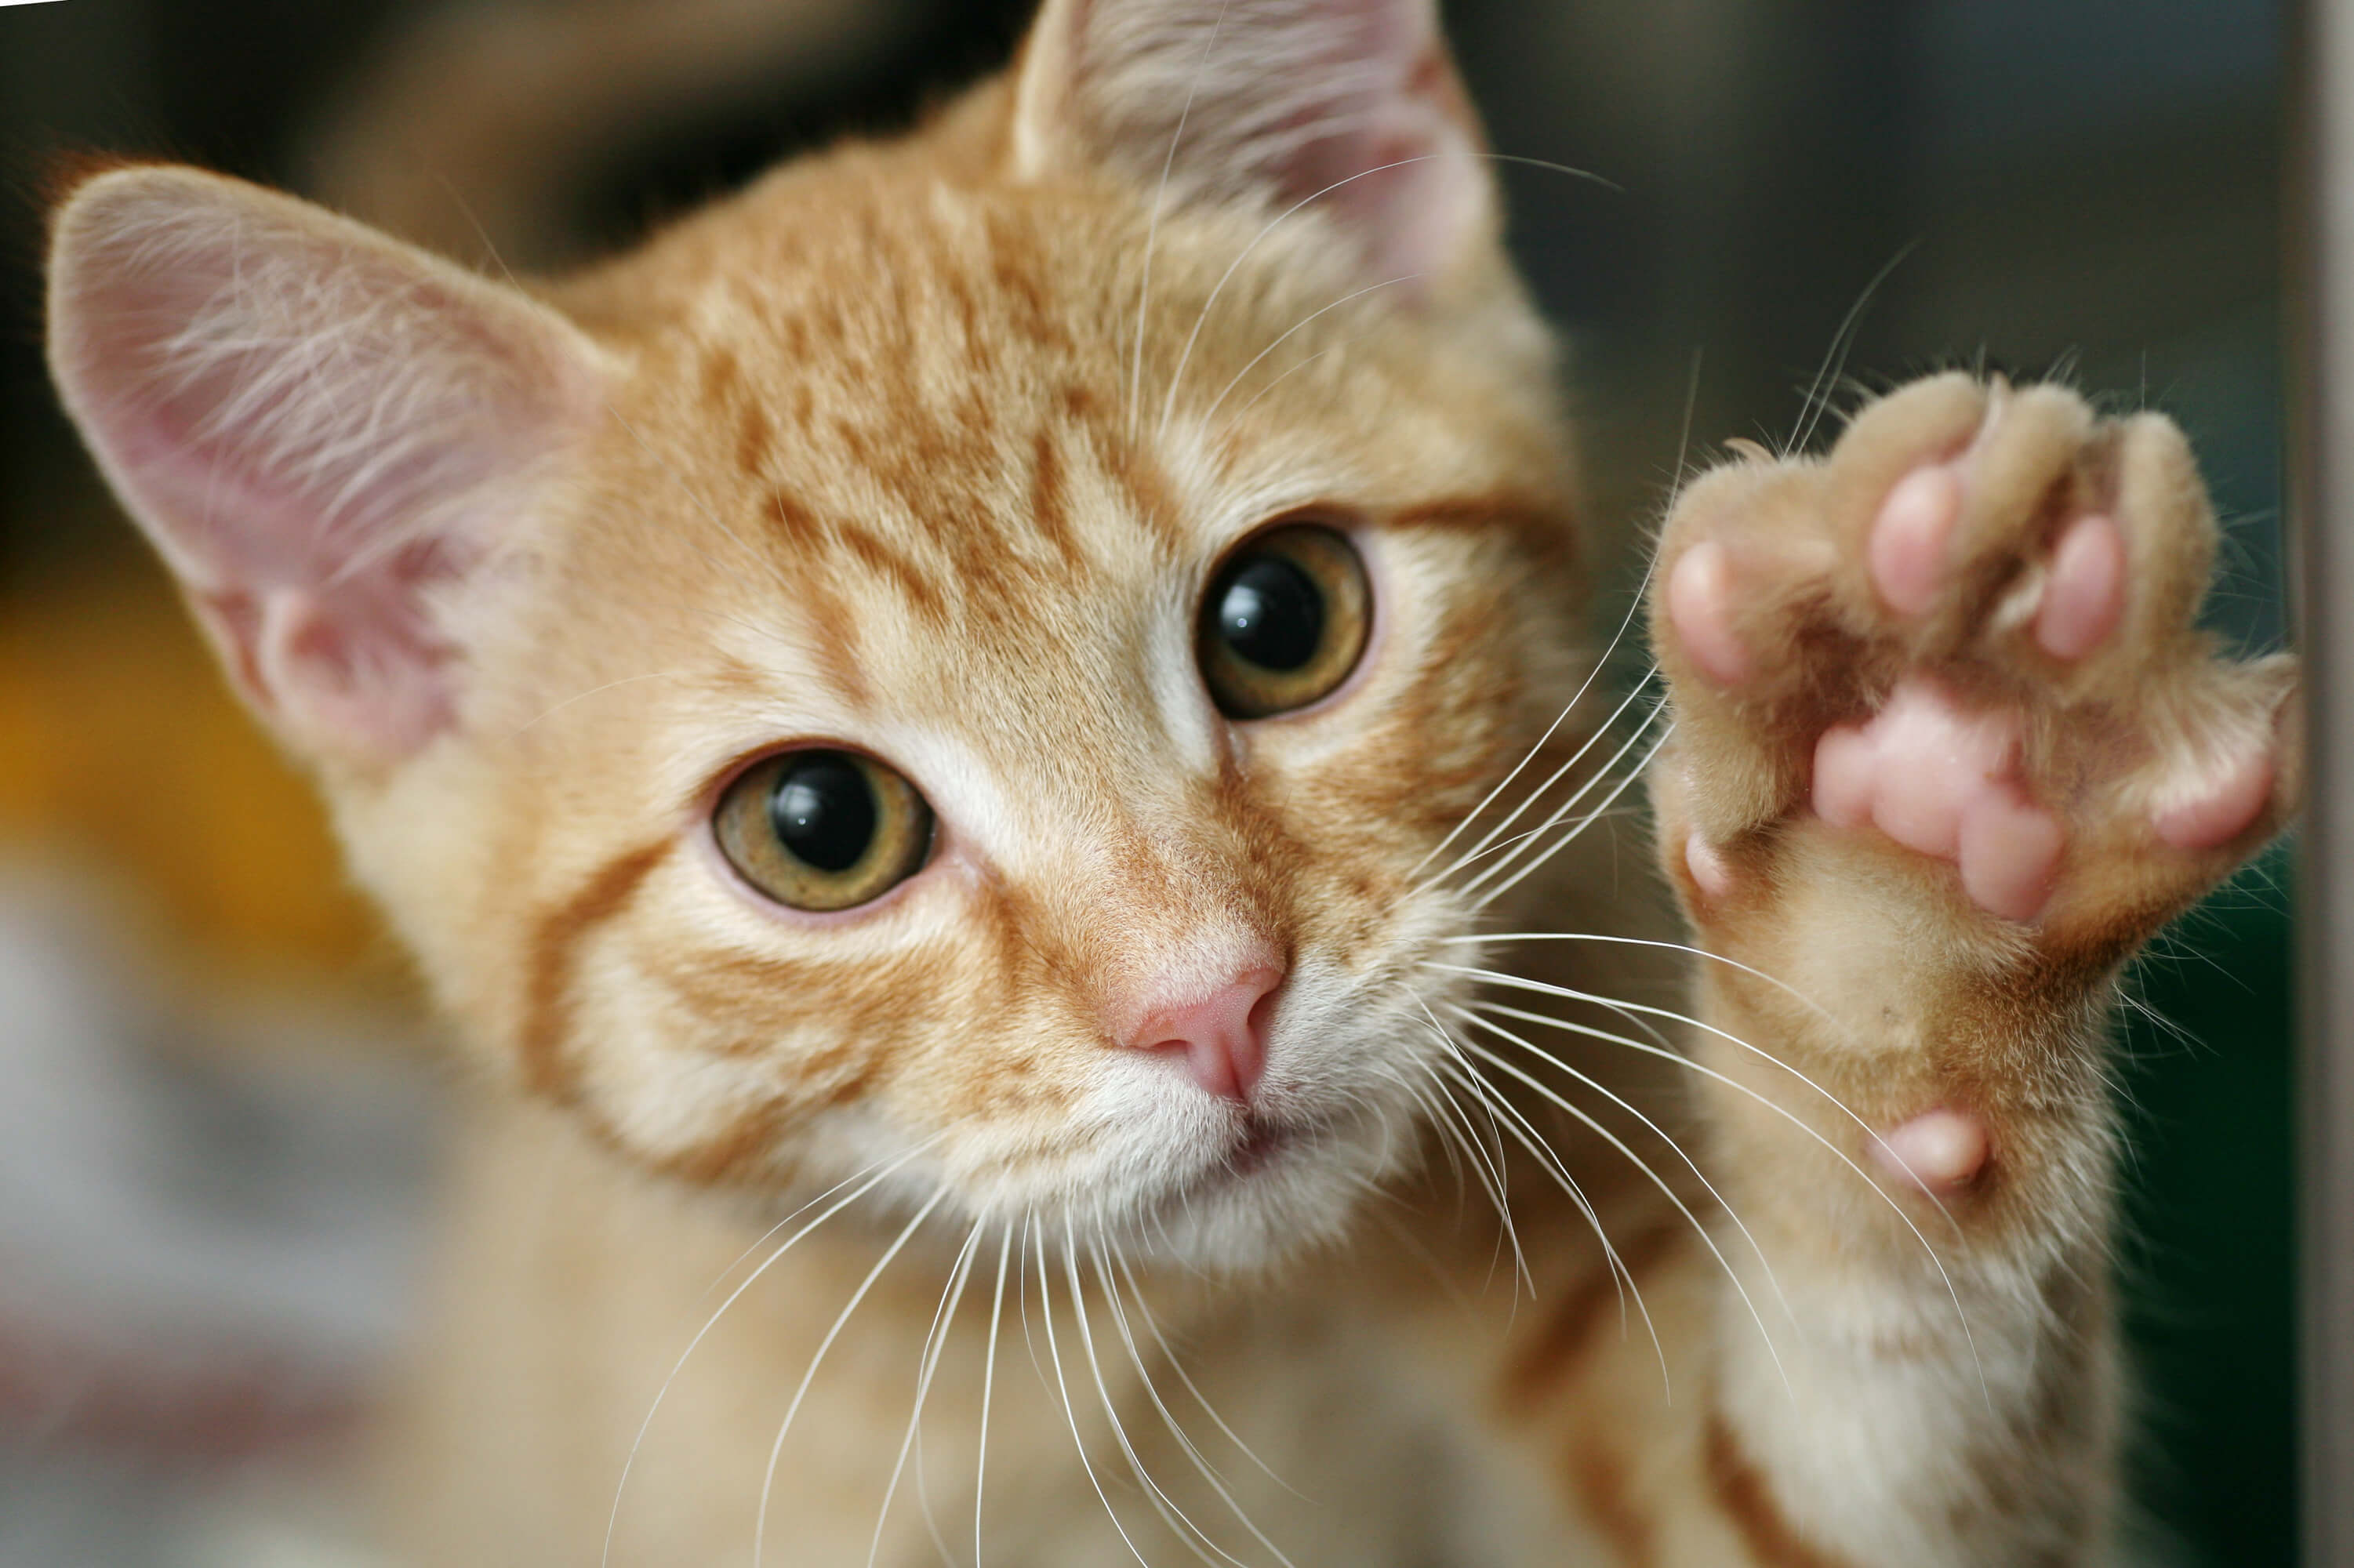 Cute orange tabby kitten reaches out his paw